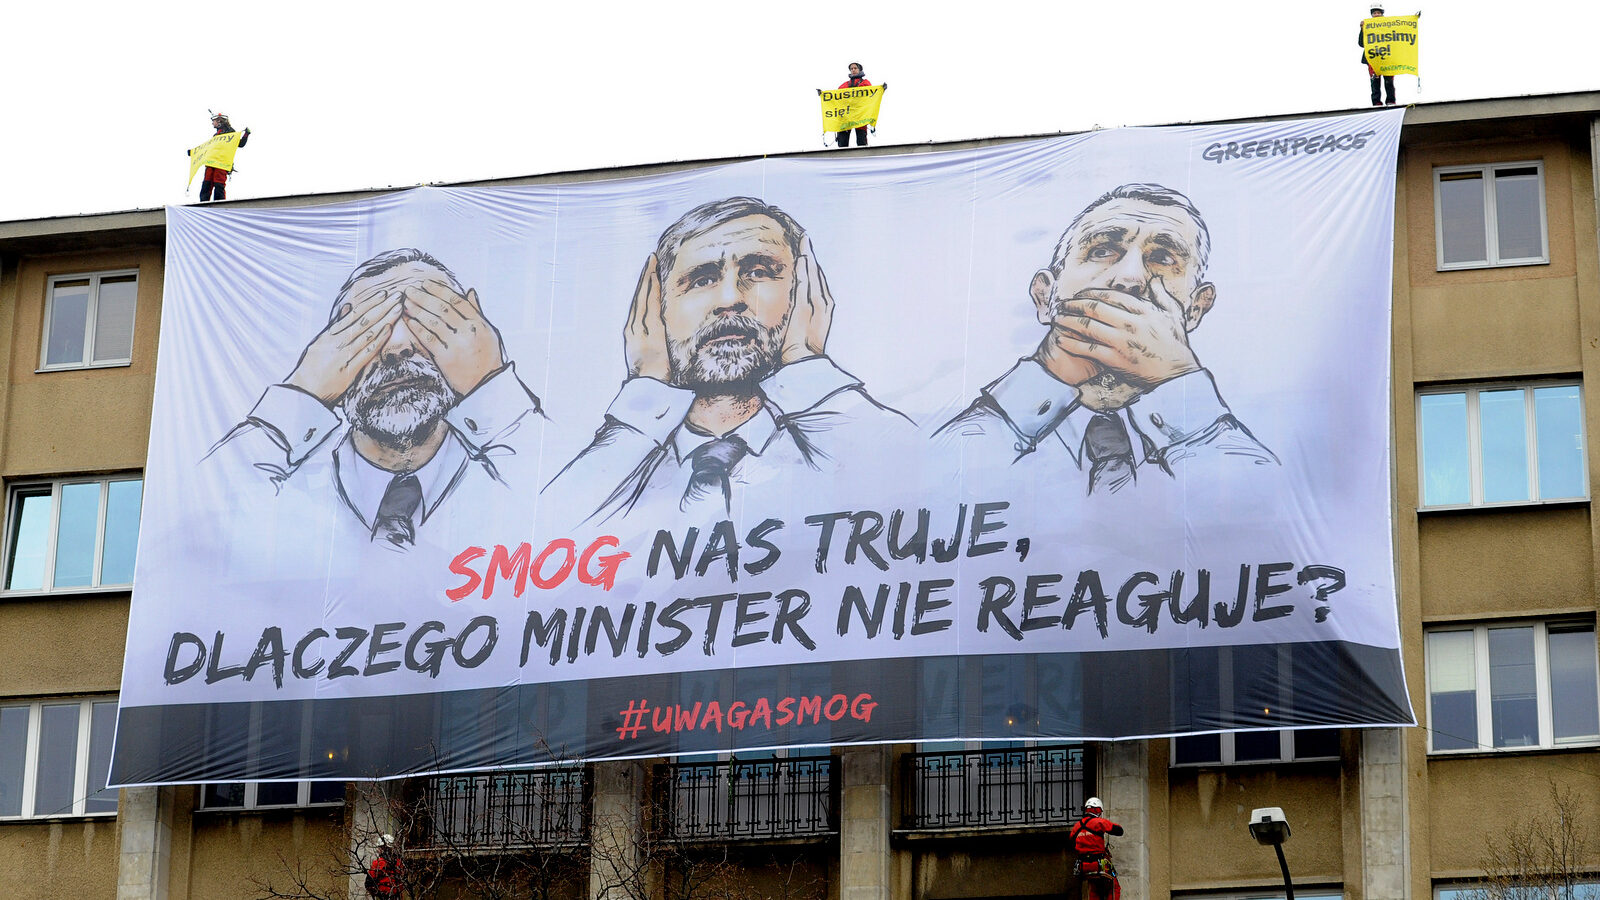 Greenpeace activists spread a banner urging Poland's Environment Minister Maciej Grabowski to react to excessive smog, in Warsaw, Poland, April 8, 2015. The banner reads: 'Smog poisons us. Why doesn't the minister react?'. (AP/Alik Keplicz)